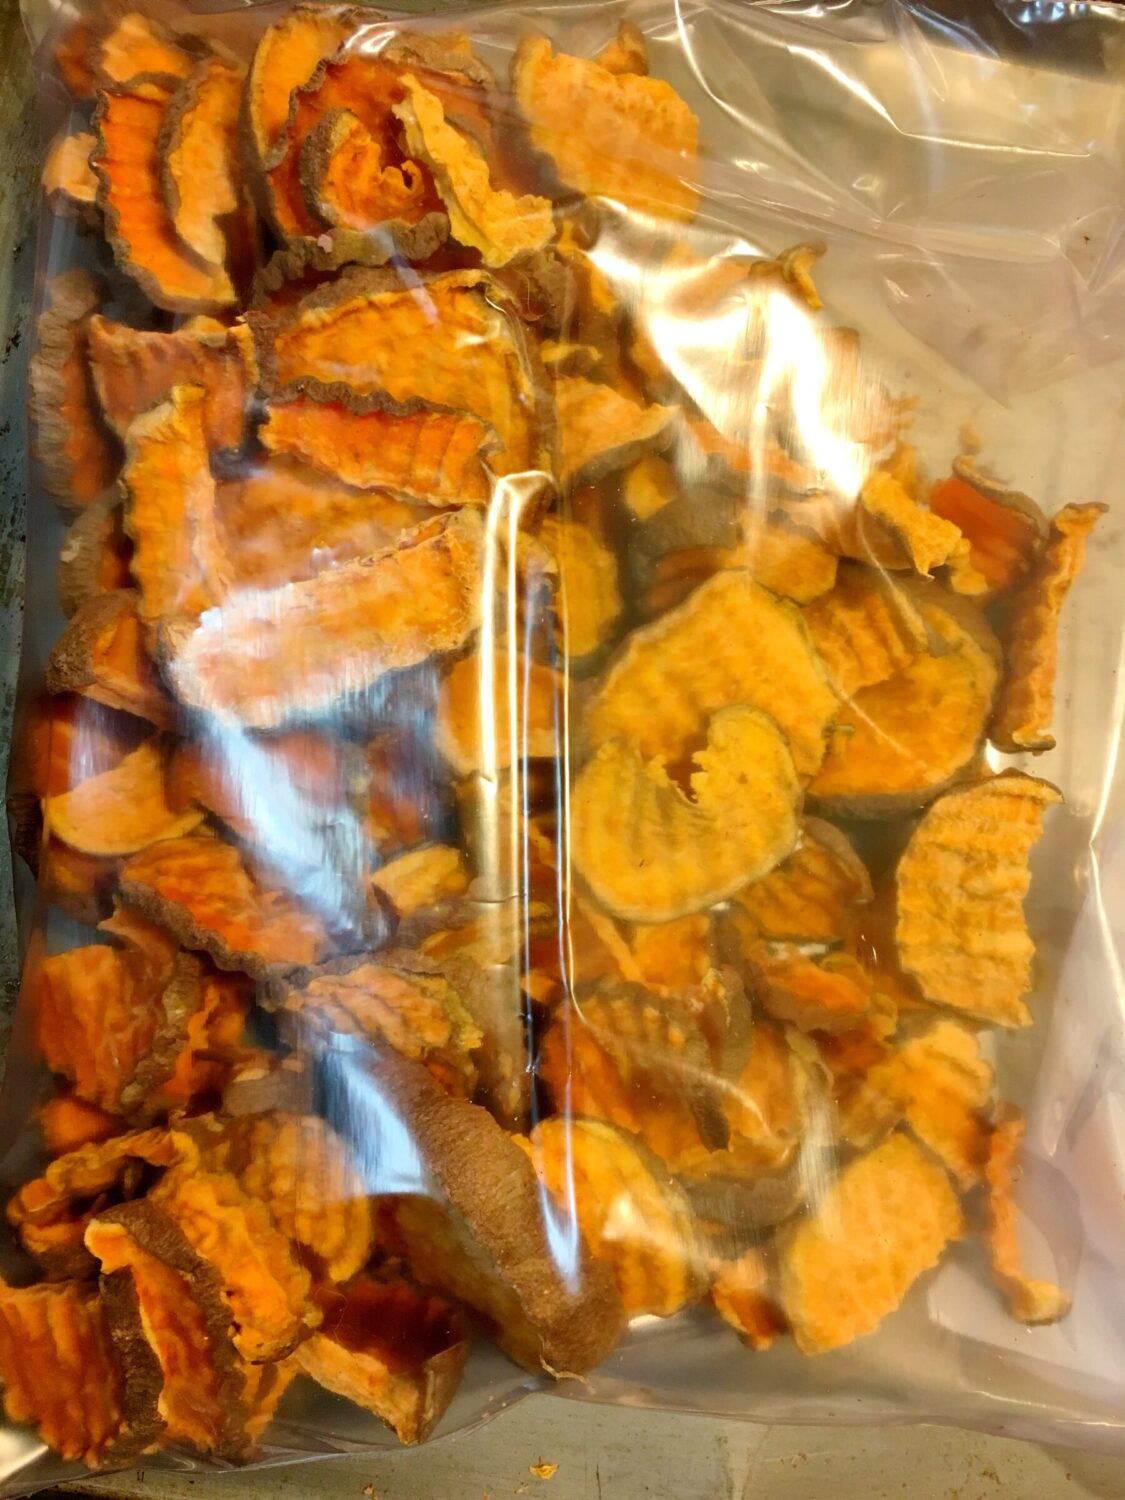 Storing Dried Yam Treats for Dog